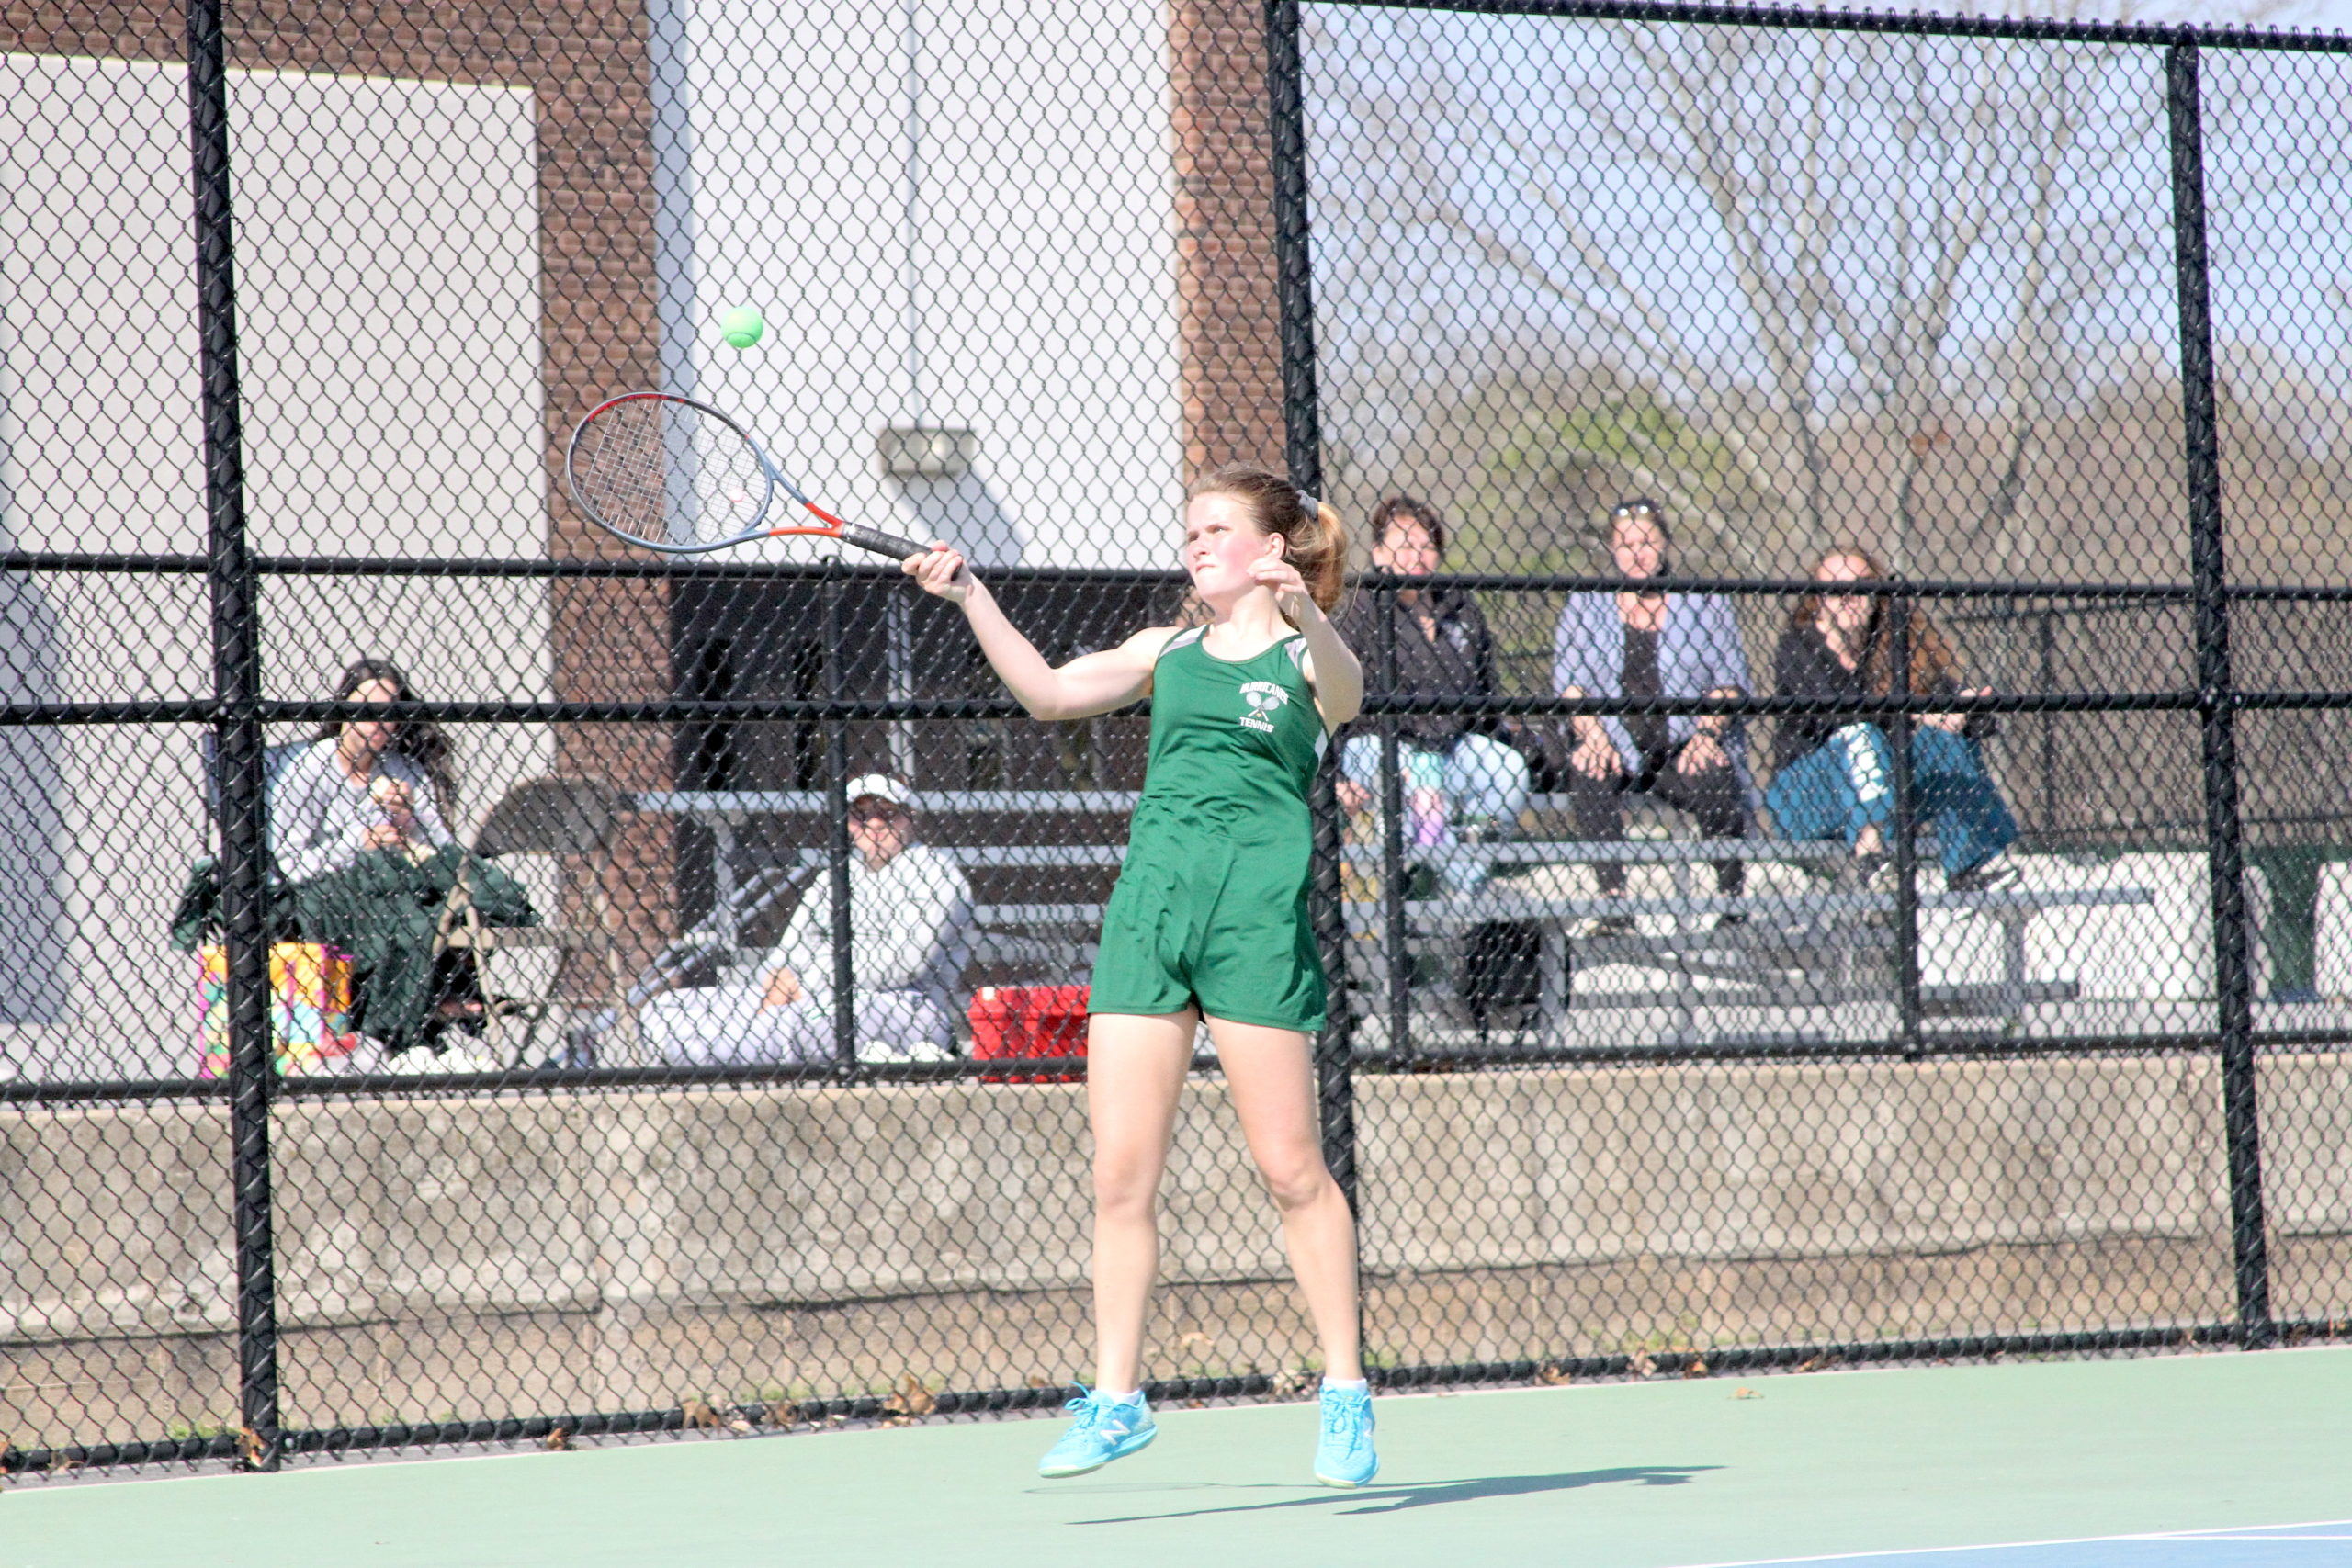 Westhampton Beach junior Katelyn Stabile keeps the volley going against East Hampton in the Division IV doubles finals on Tuesday.